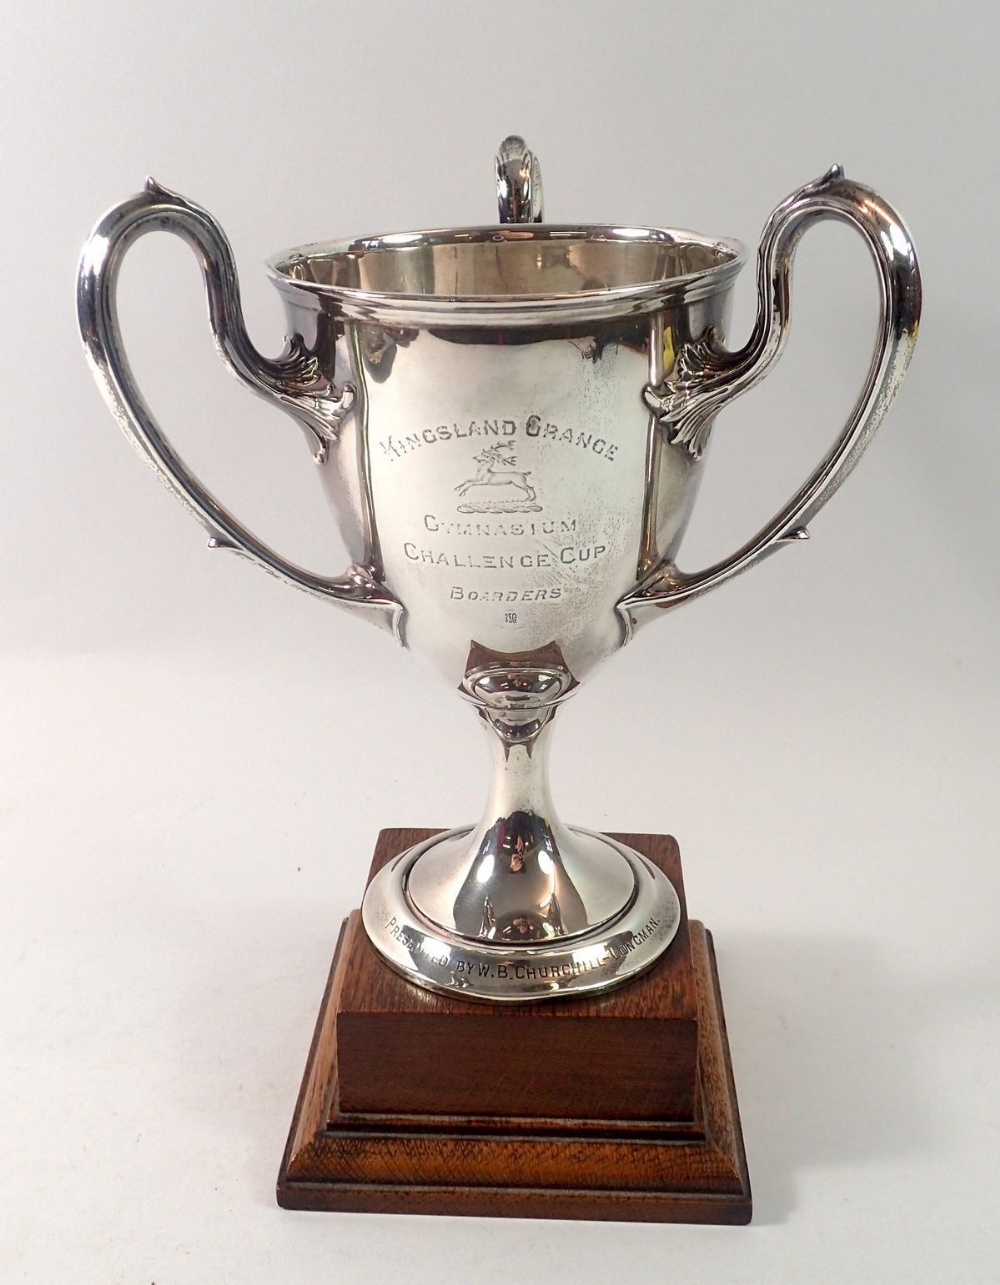 A silver three handled Art Nouveau trophy cup, 'Kingsland Grand Gymnasium Cup', engraved names,